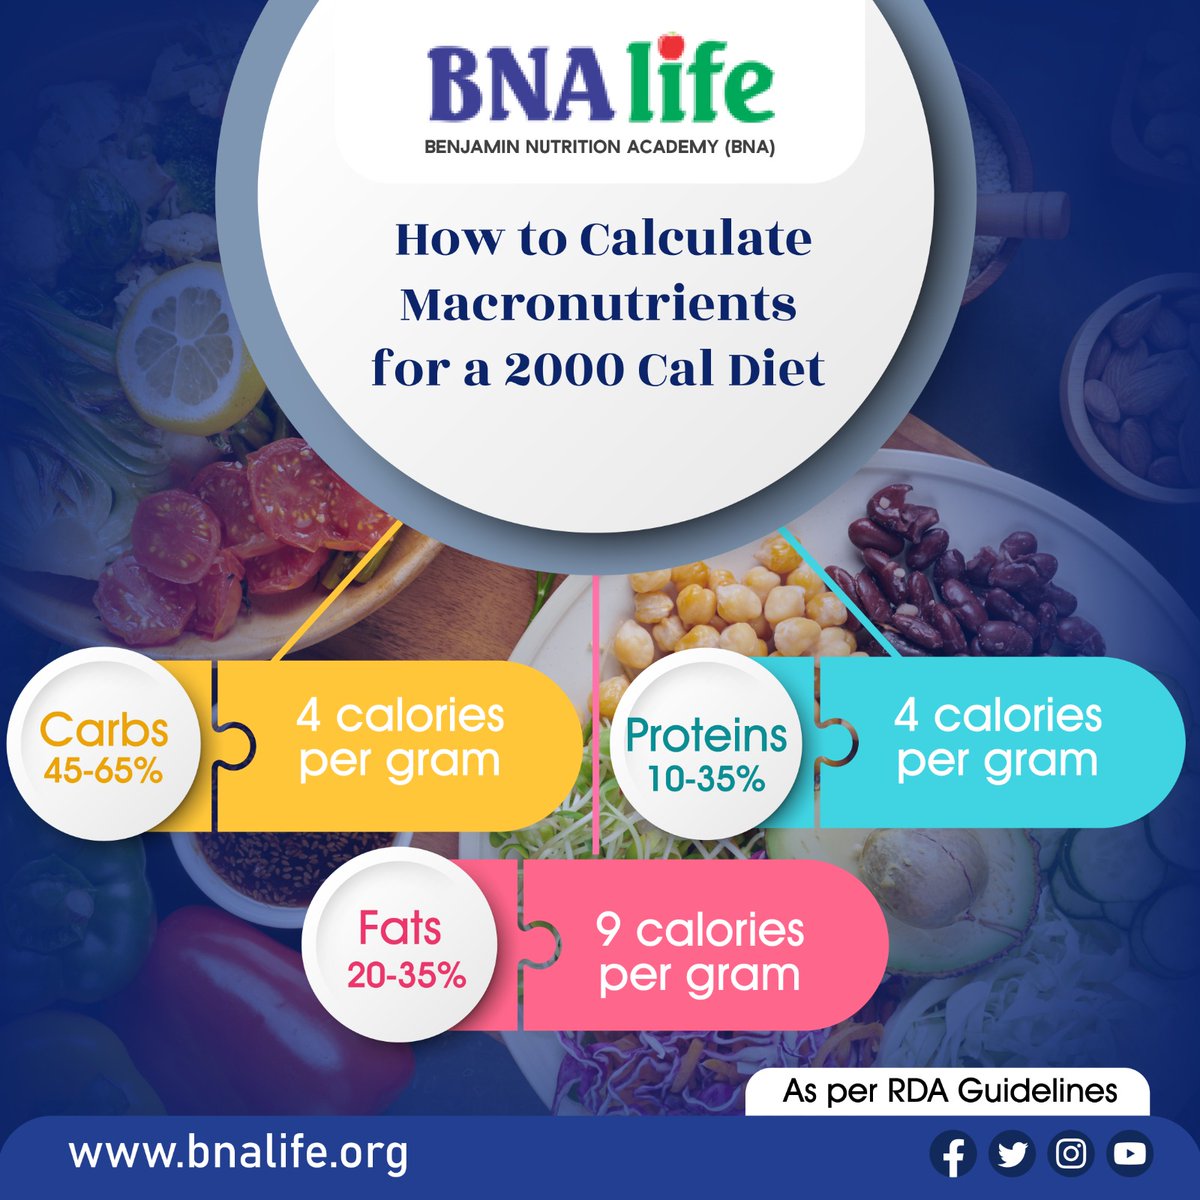 Macronutrients are calculated as follows for a 2000 Cal diet.
Carbs - 45-65%
Proteins - 10-35%
Fats - 20-35%
bnalife.org
#healthylifestyle #healthandnutrition #healthy #nutritionistlife #nutrients #healthcoach #nutritionblogger #nutrion #holisticnutritionist #diabetes